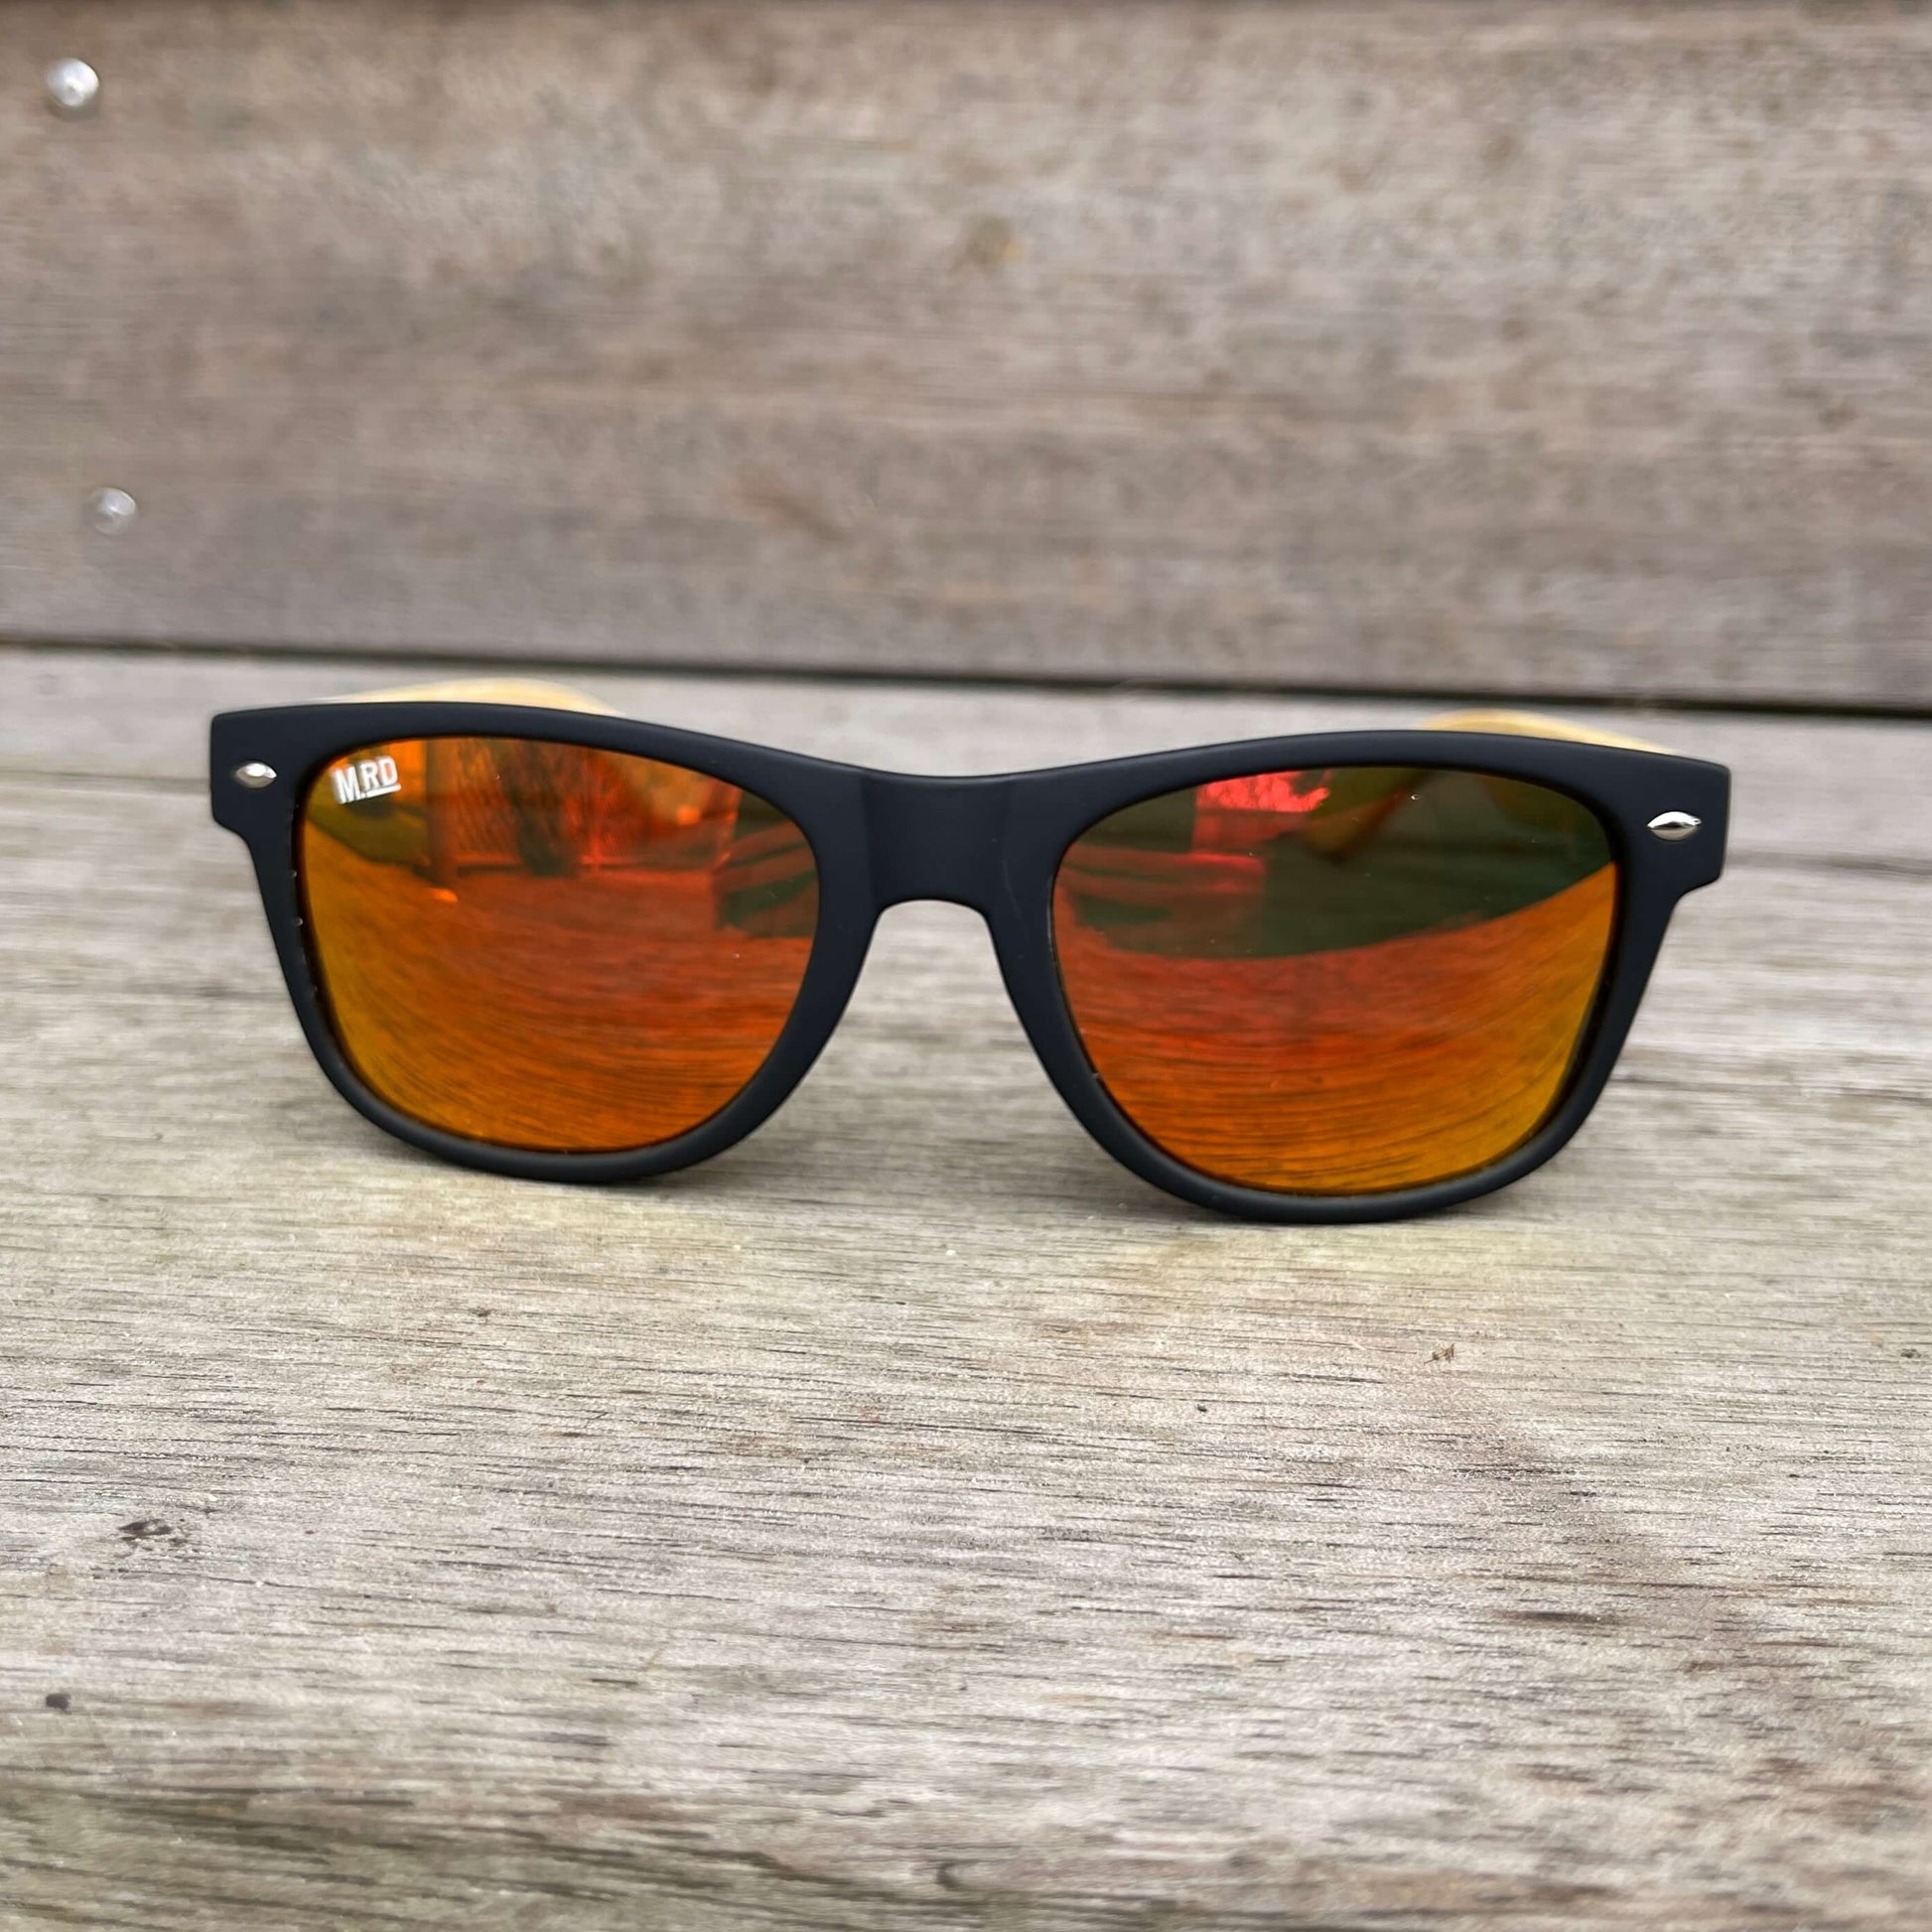 Sunglasses with wooden arms, black frames and reflective lenses.